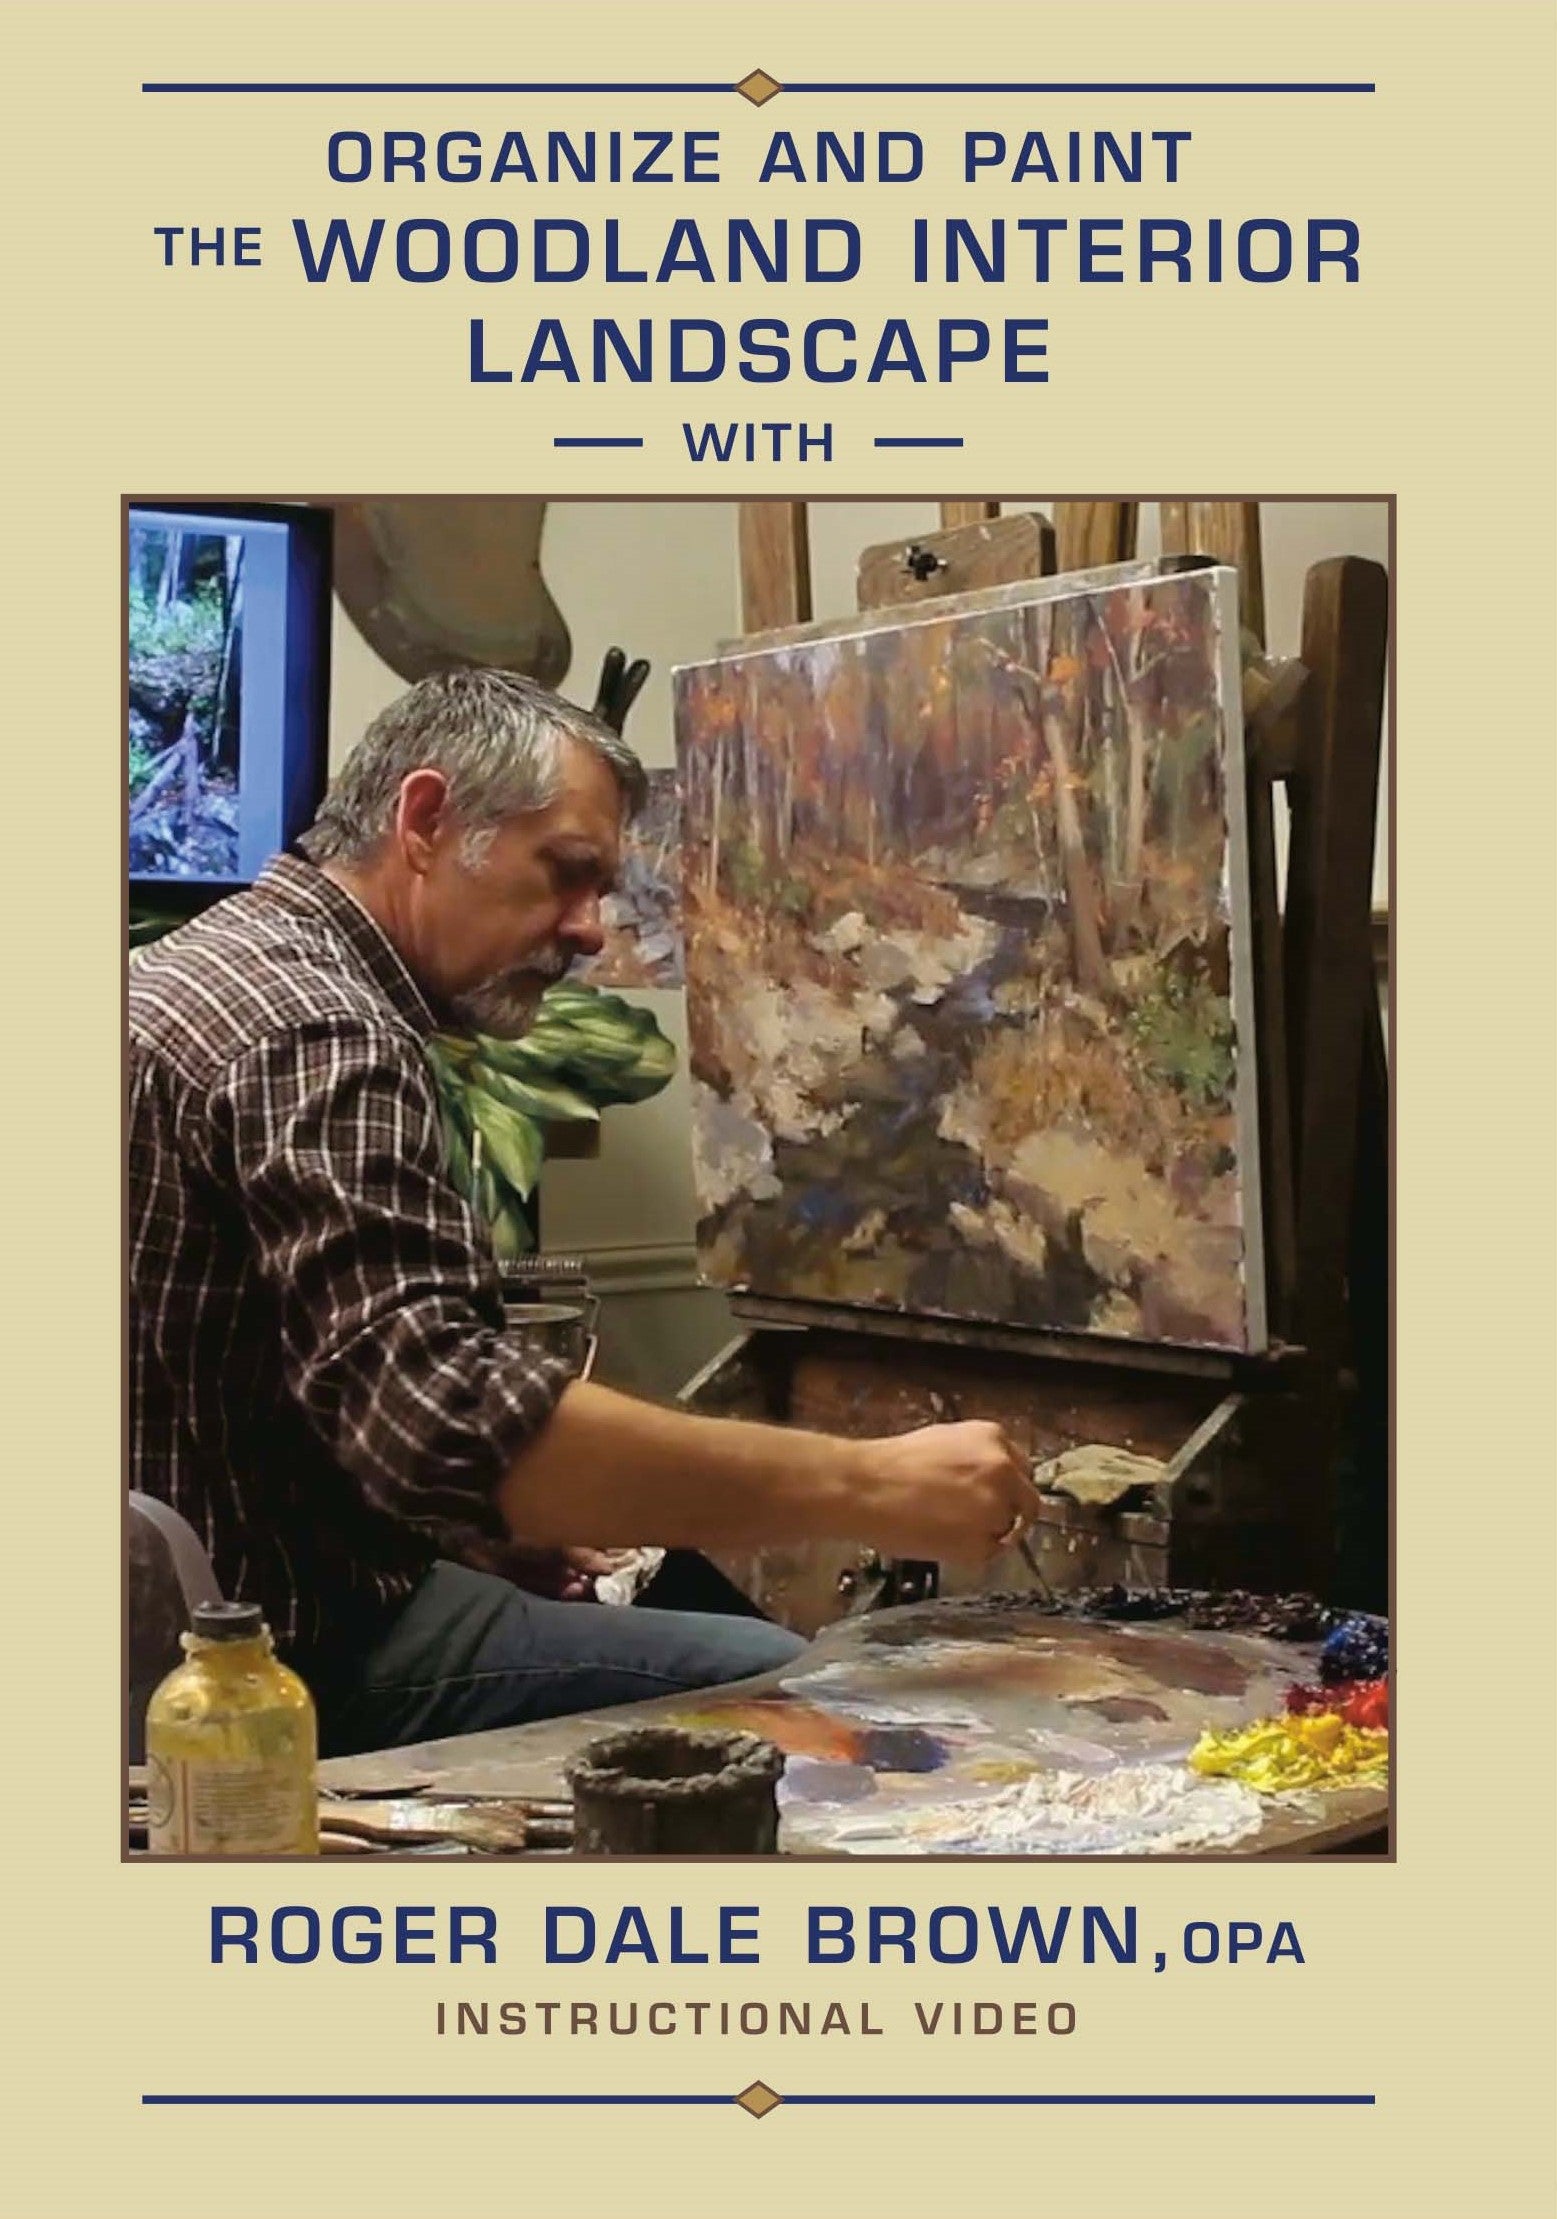 Roger Dale Brown: Organize and Paint The Woodland Interior Landscape